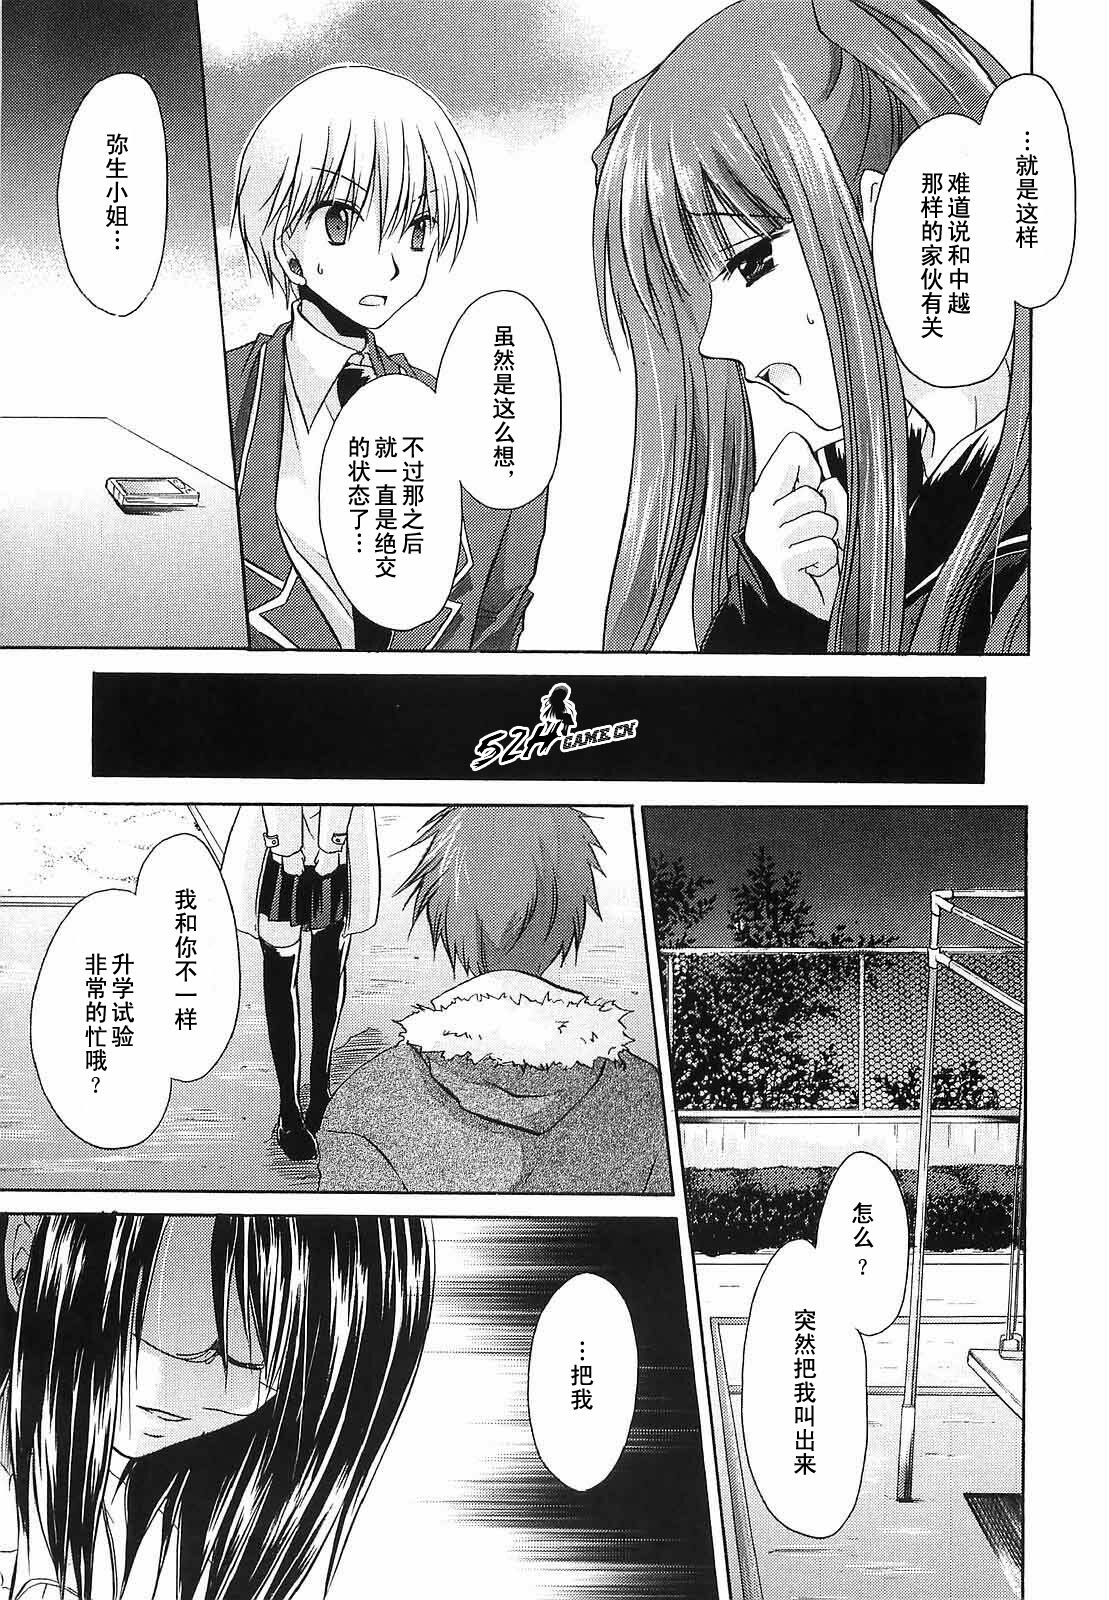 [Shinonome Ryu] LOVE&HATE 3 ~ENGAGE~ [Chinese] [52H漢化組] page 47 full